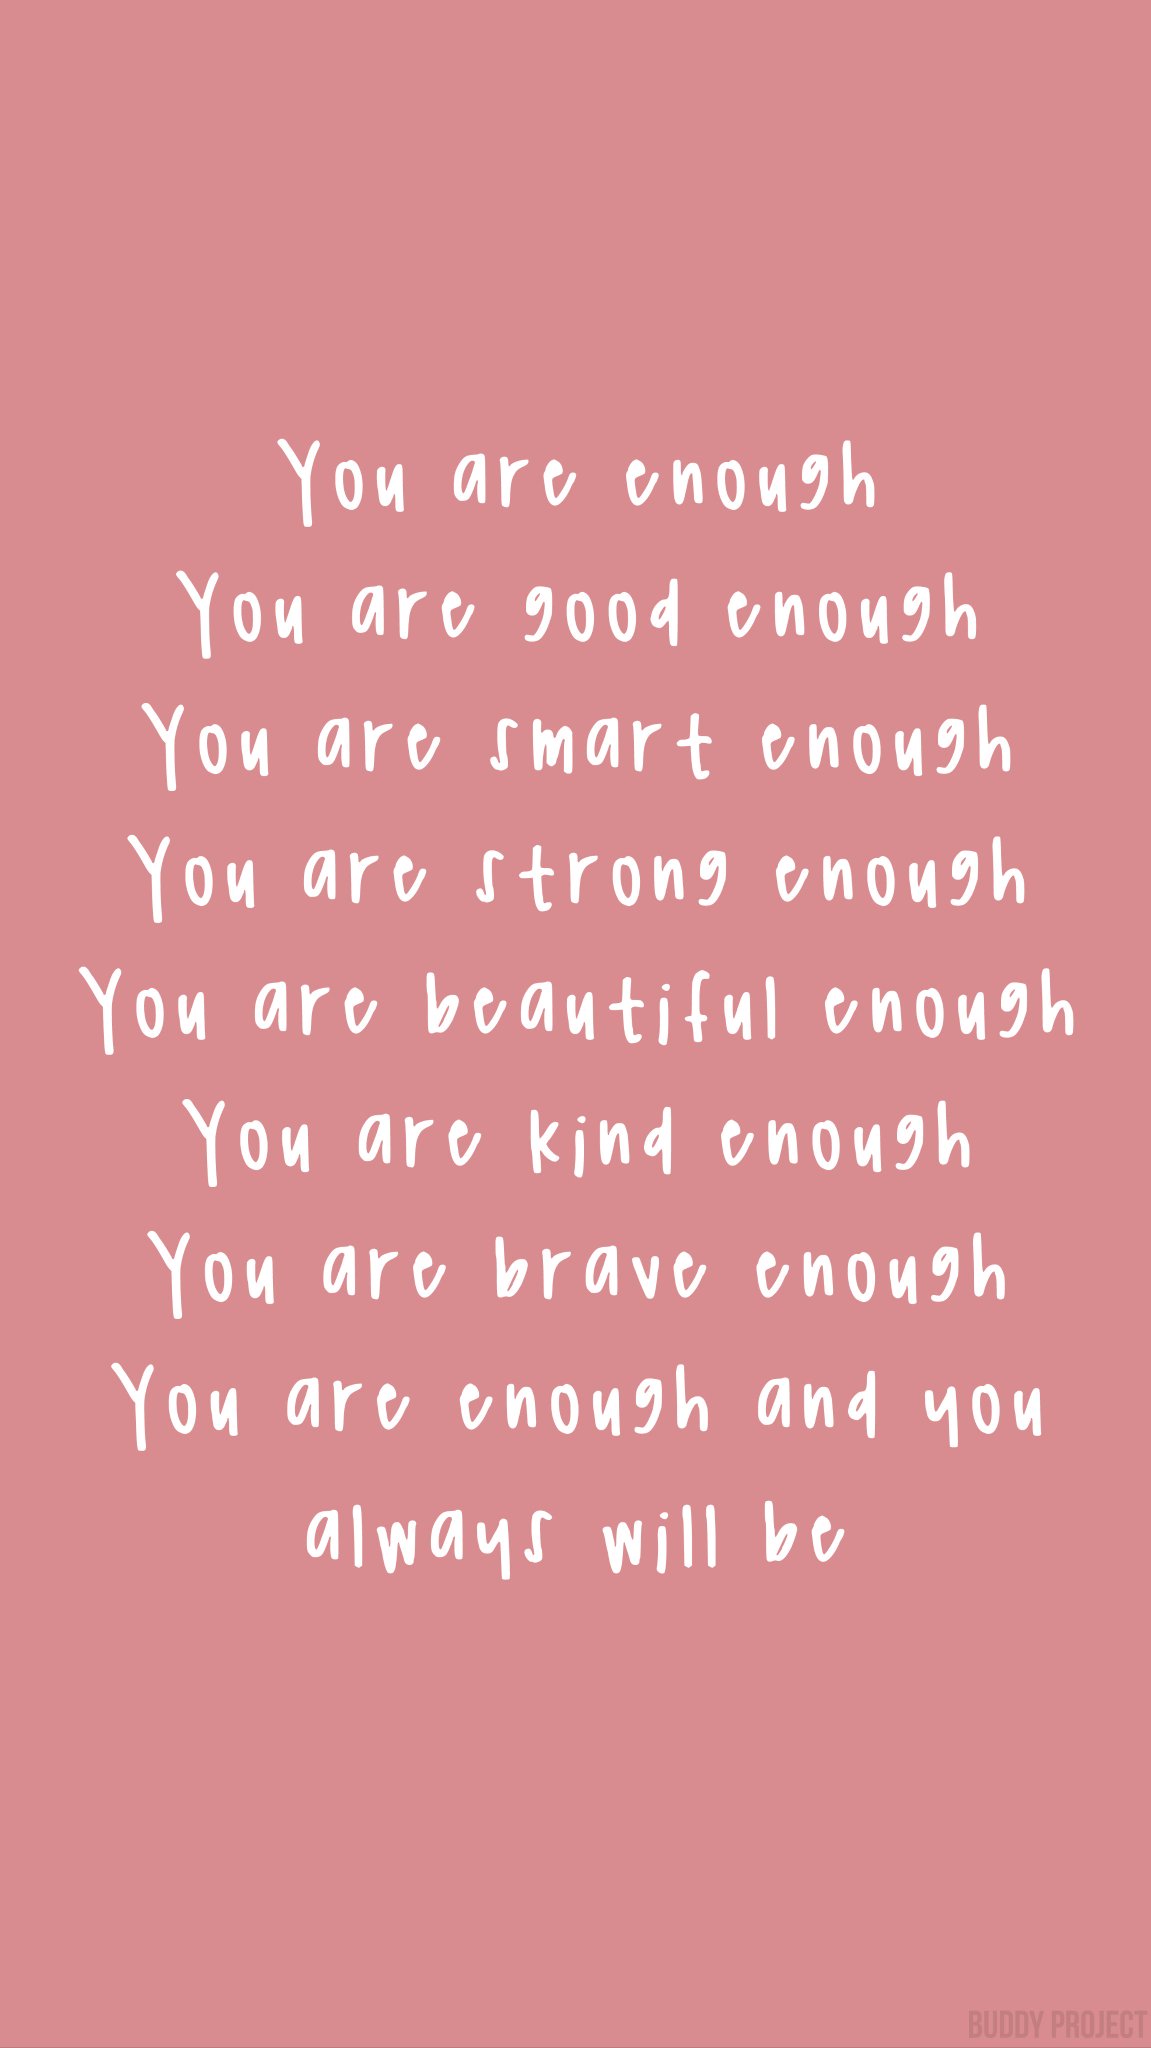 Buddy Project on Twitter: "You are enough. You are good enough ...